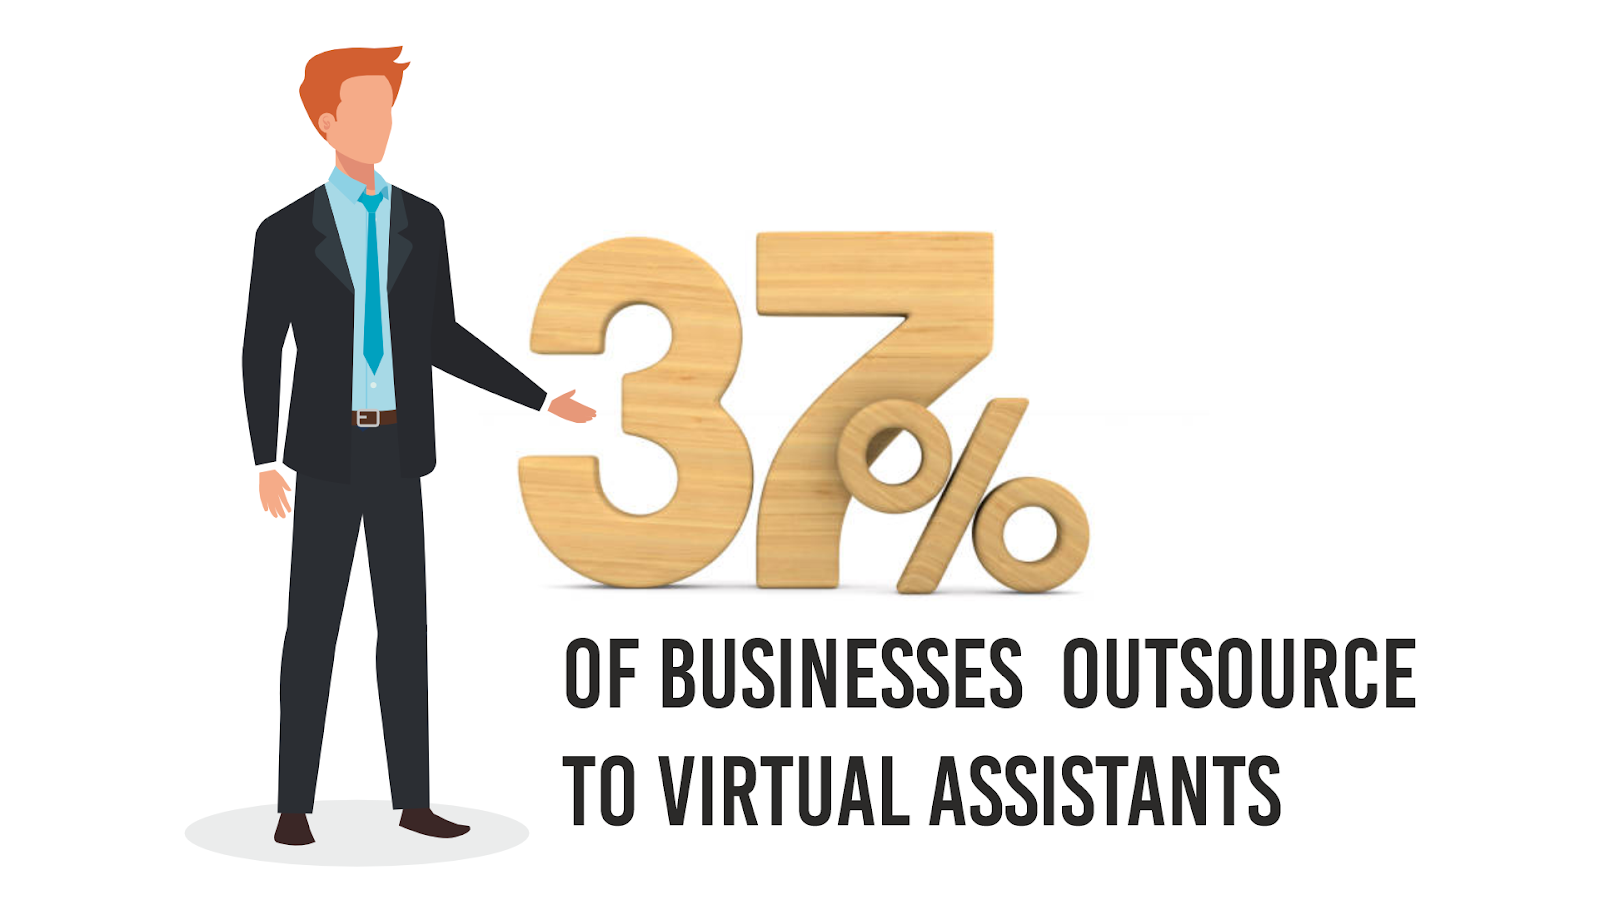 Infographic showing 37% of businesses outsource tasks to virtual assistants